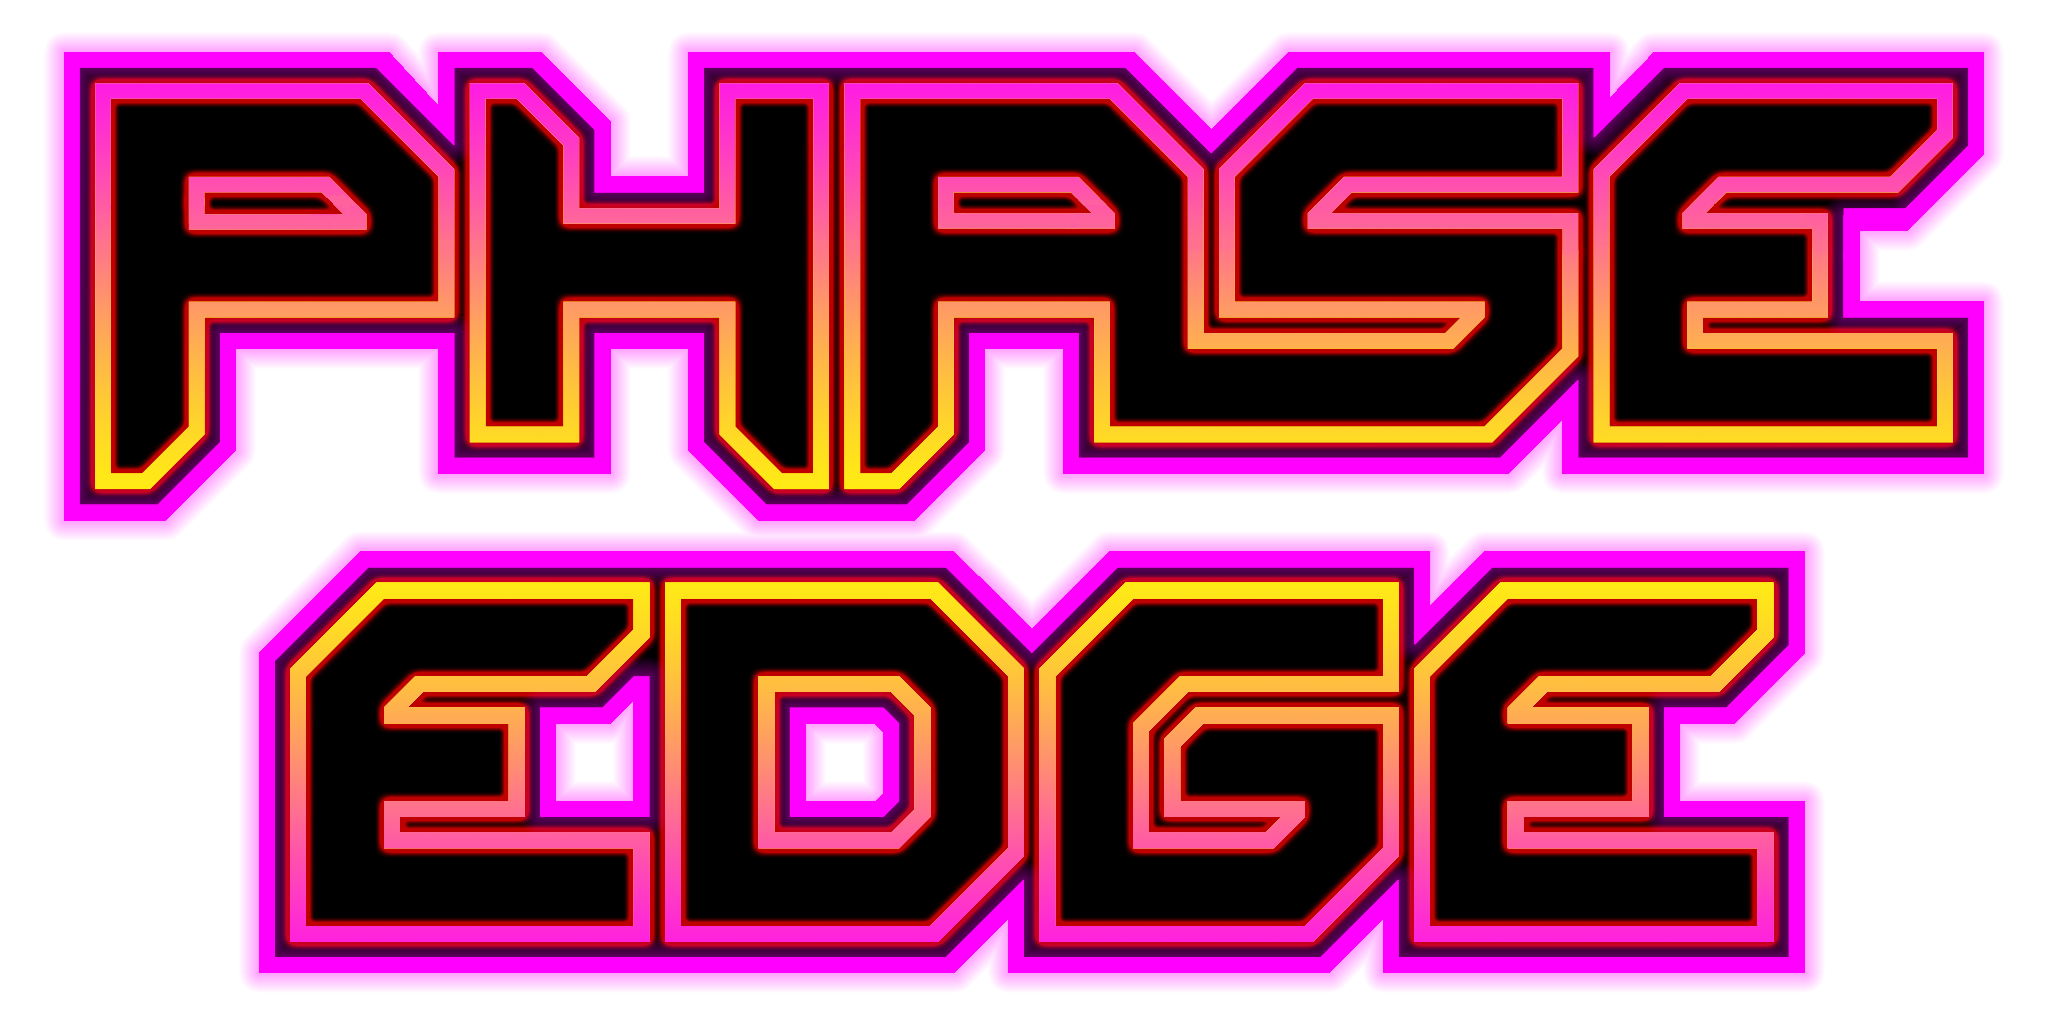 Phase_Edge_2048x1024.png